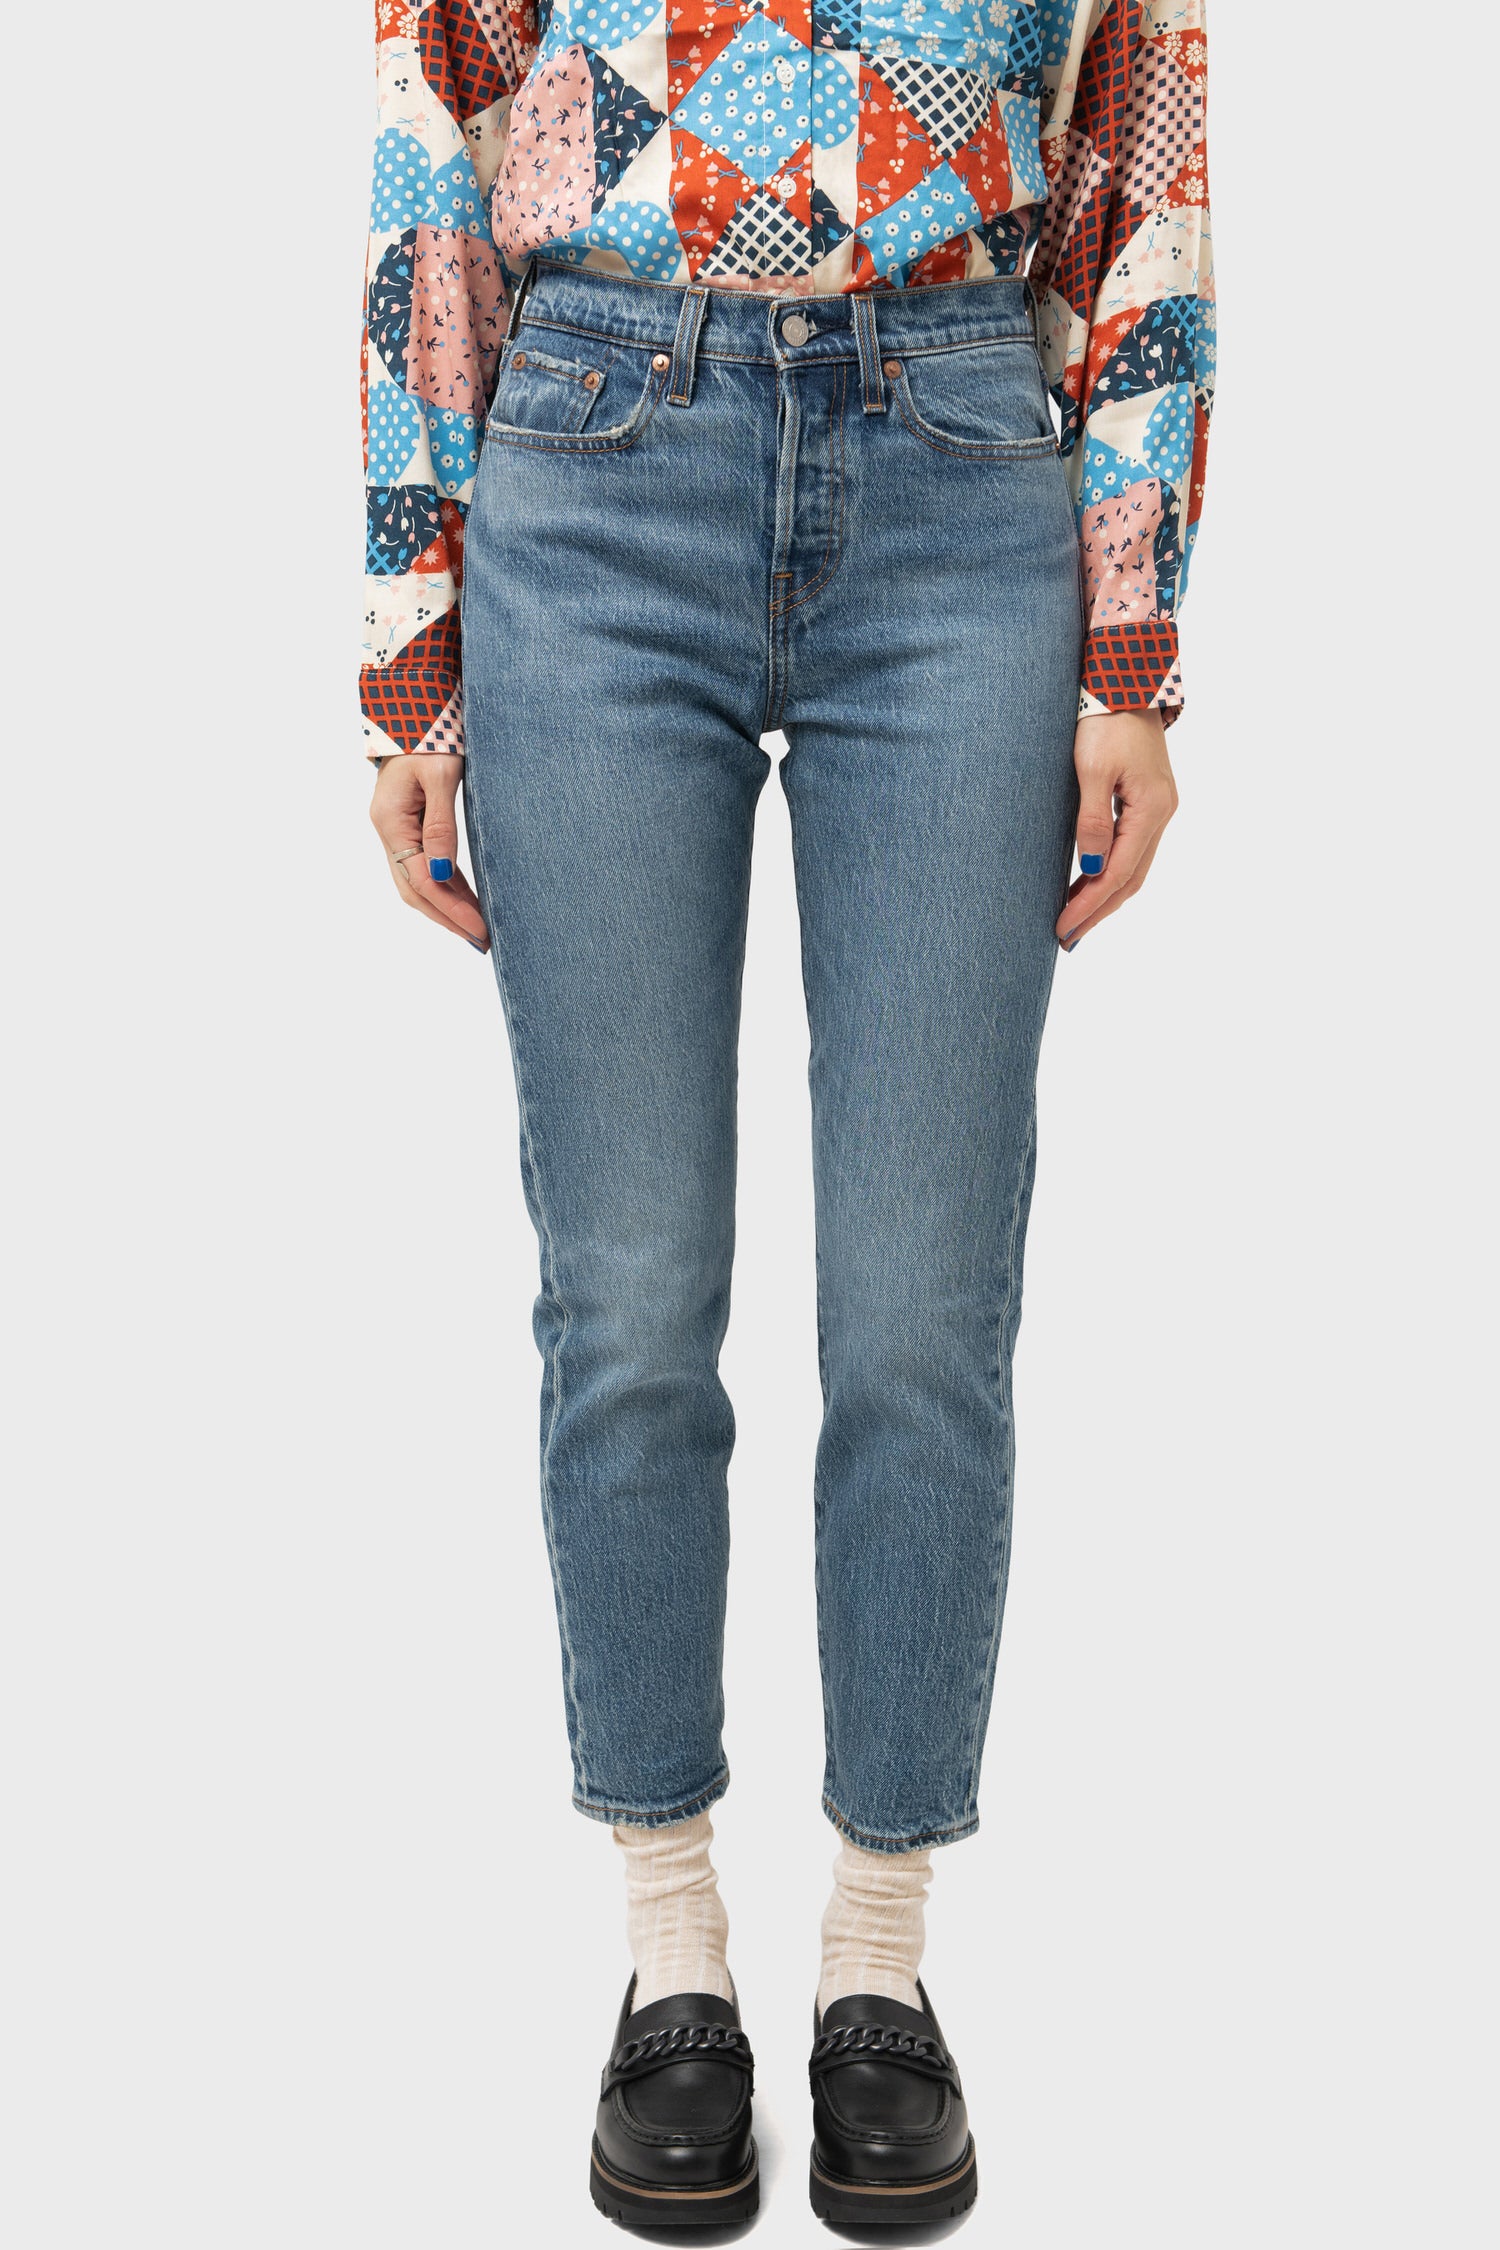 Women's Levi's Wedgie Icon Fit in These Dreams